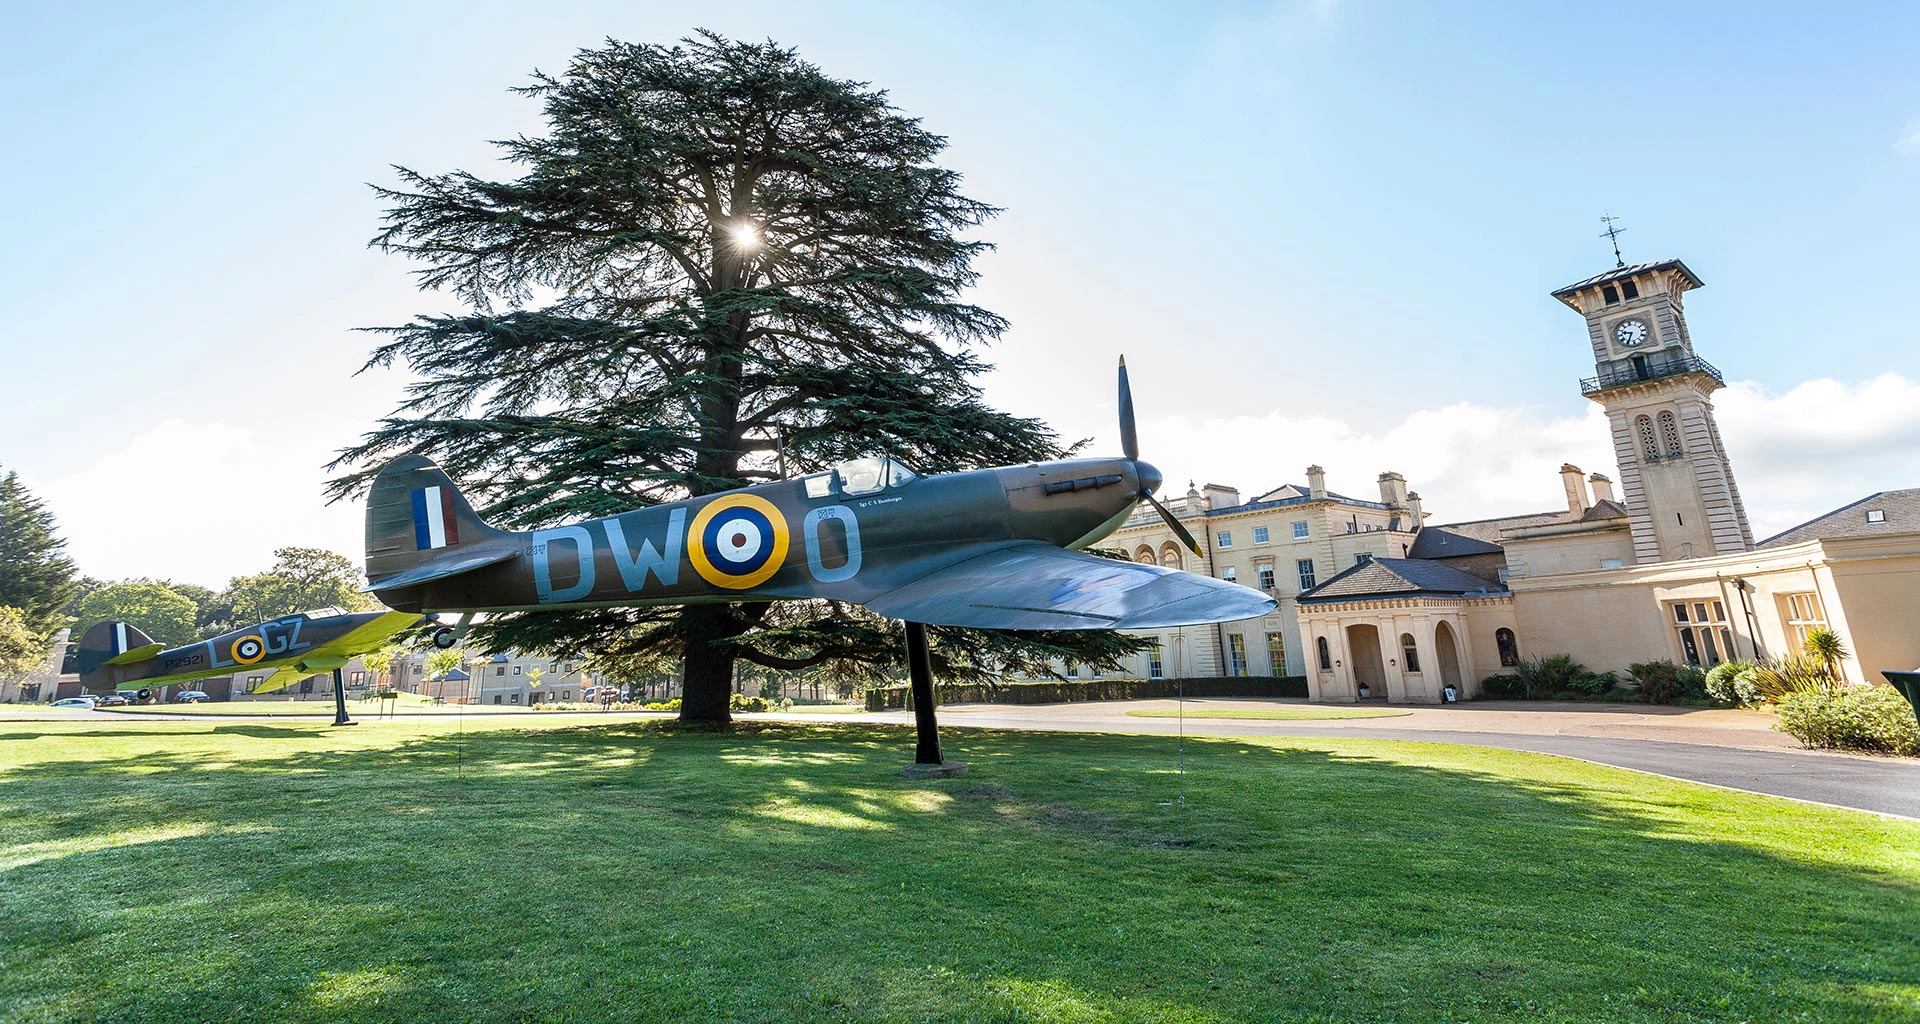 Spitfire at Bentley Priory Museum